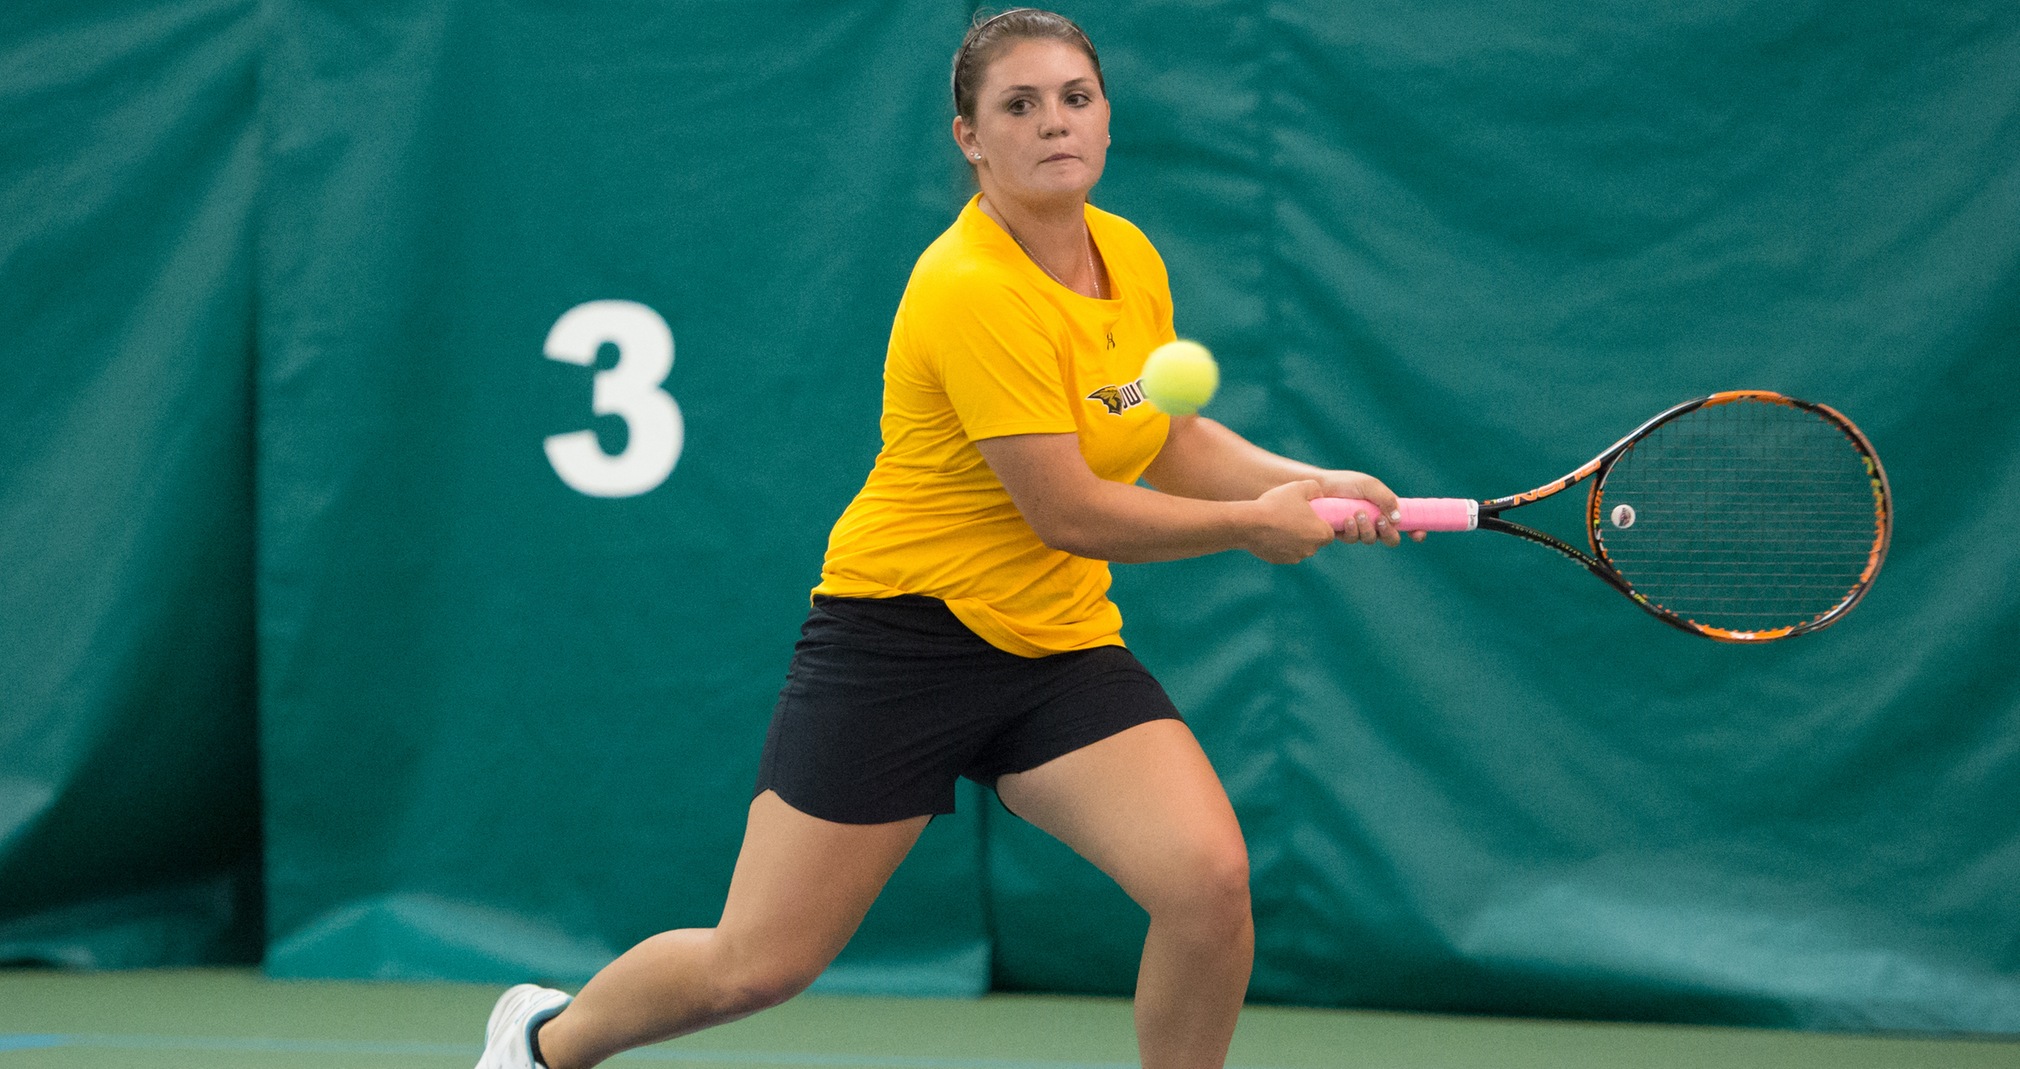 Samantha Koppa was a winner in 20 of her 21 games against the Pointers, including all 12 (6-0, 6-0) at No. 4 singles.